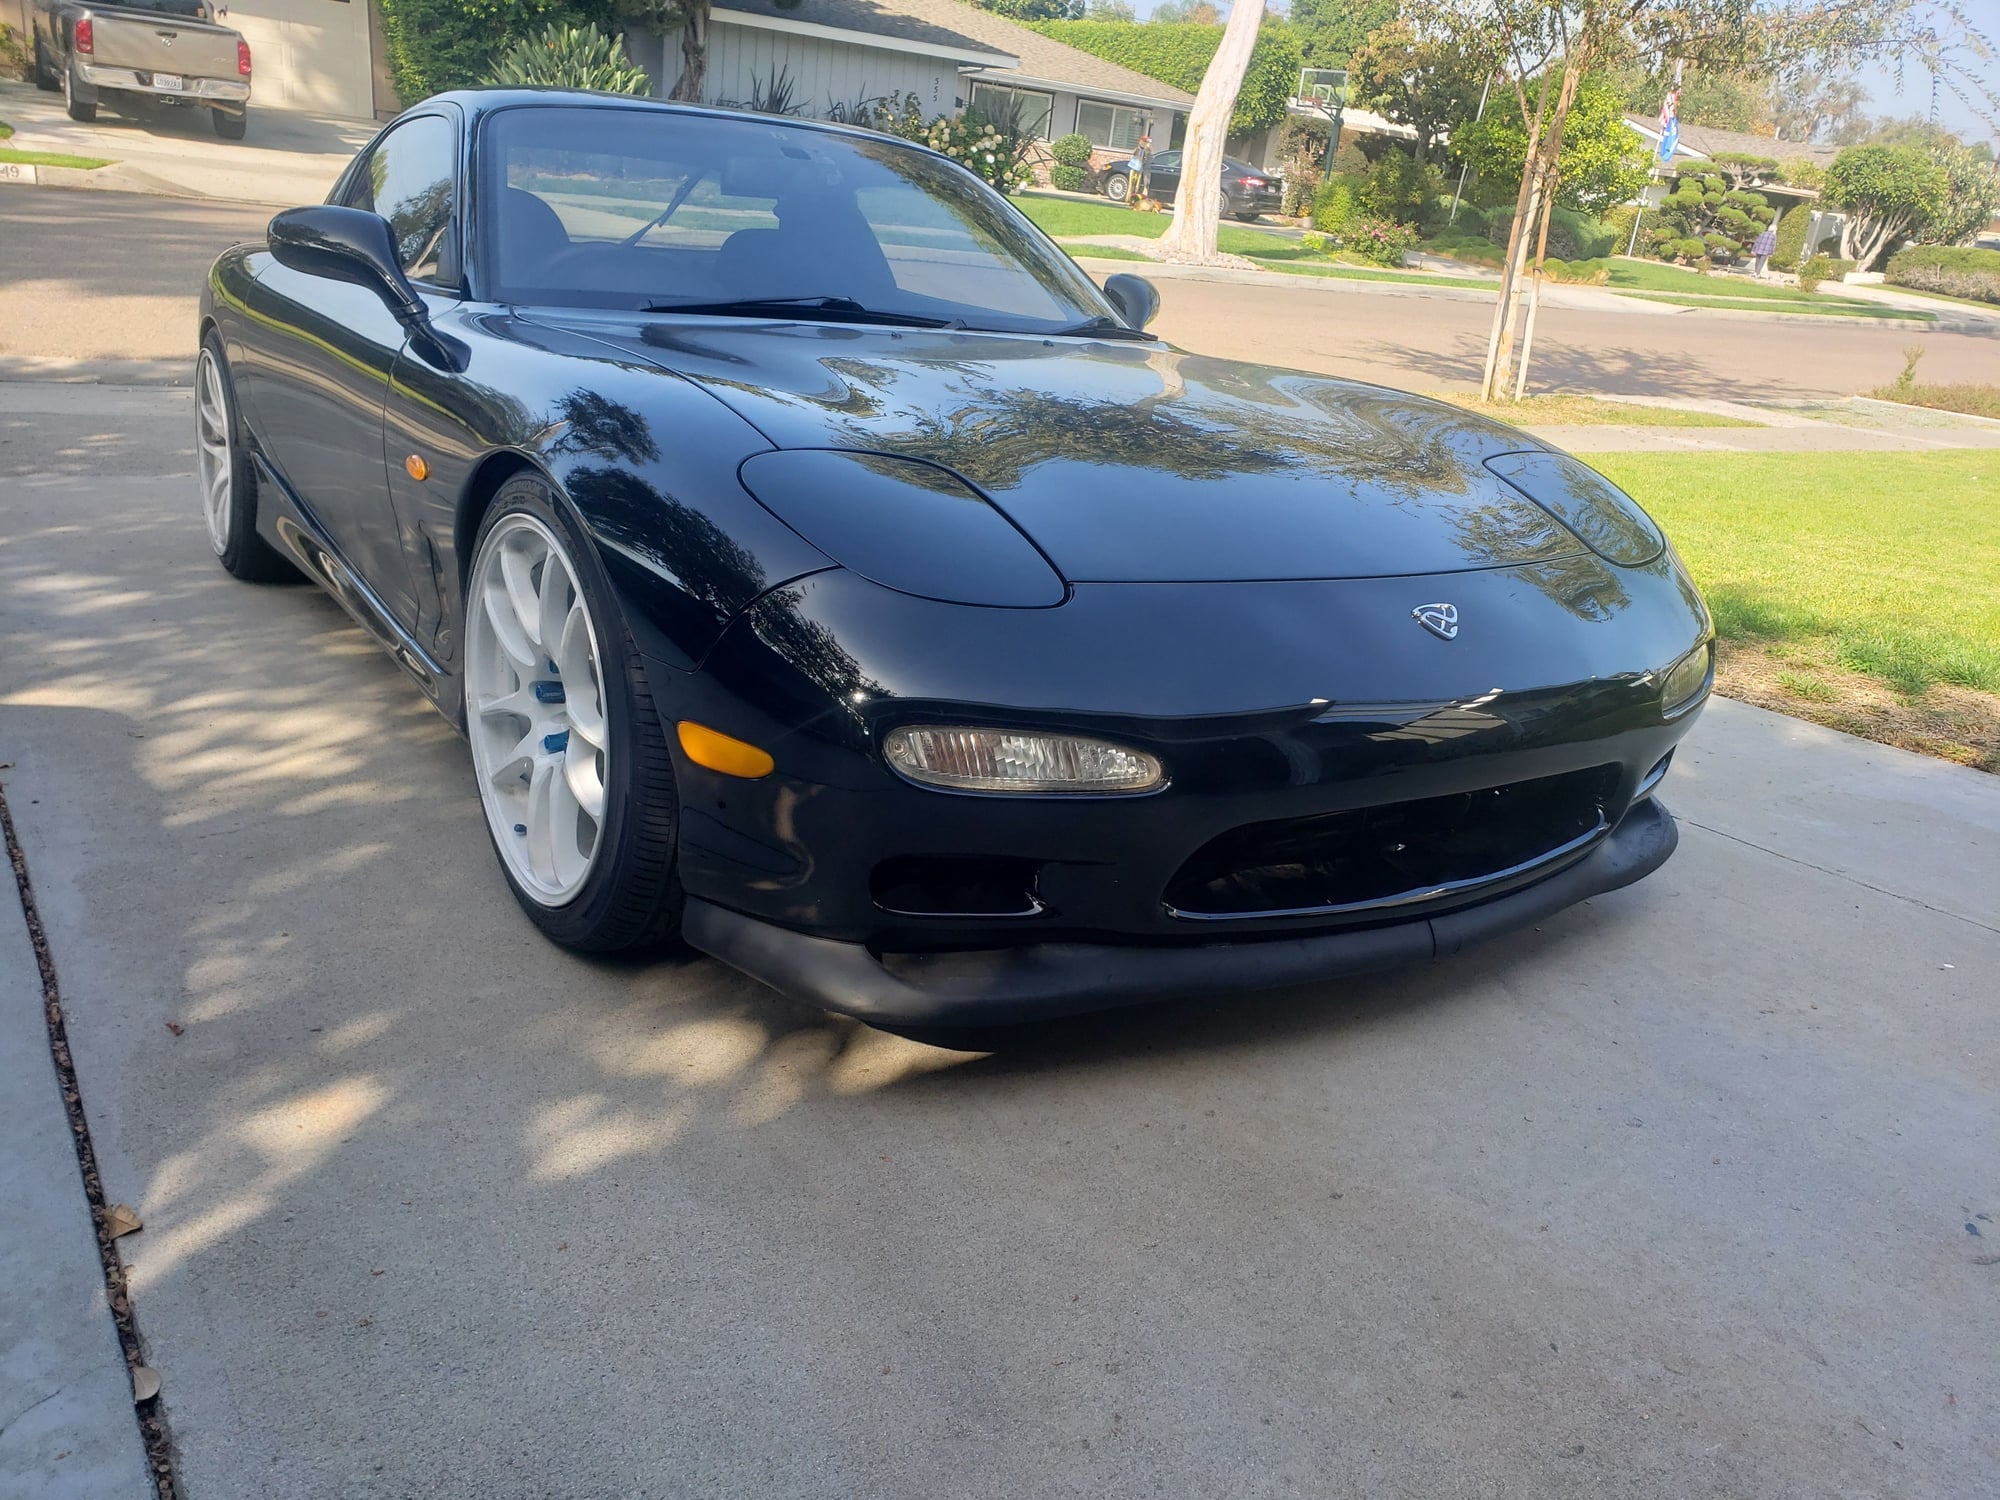 1993 Mazda RX-7 - 1992 RHD Mazda RX7 R1 - Used - VIN FD3S-109261 - Other - 2WD - Manual - Coupe - Black - Fullerton, CA 92833, United States